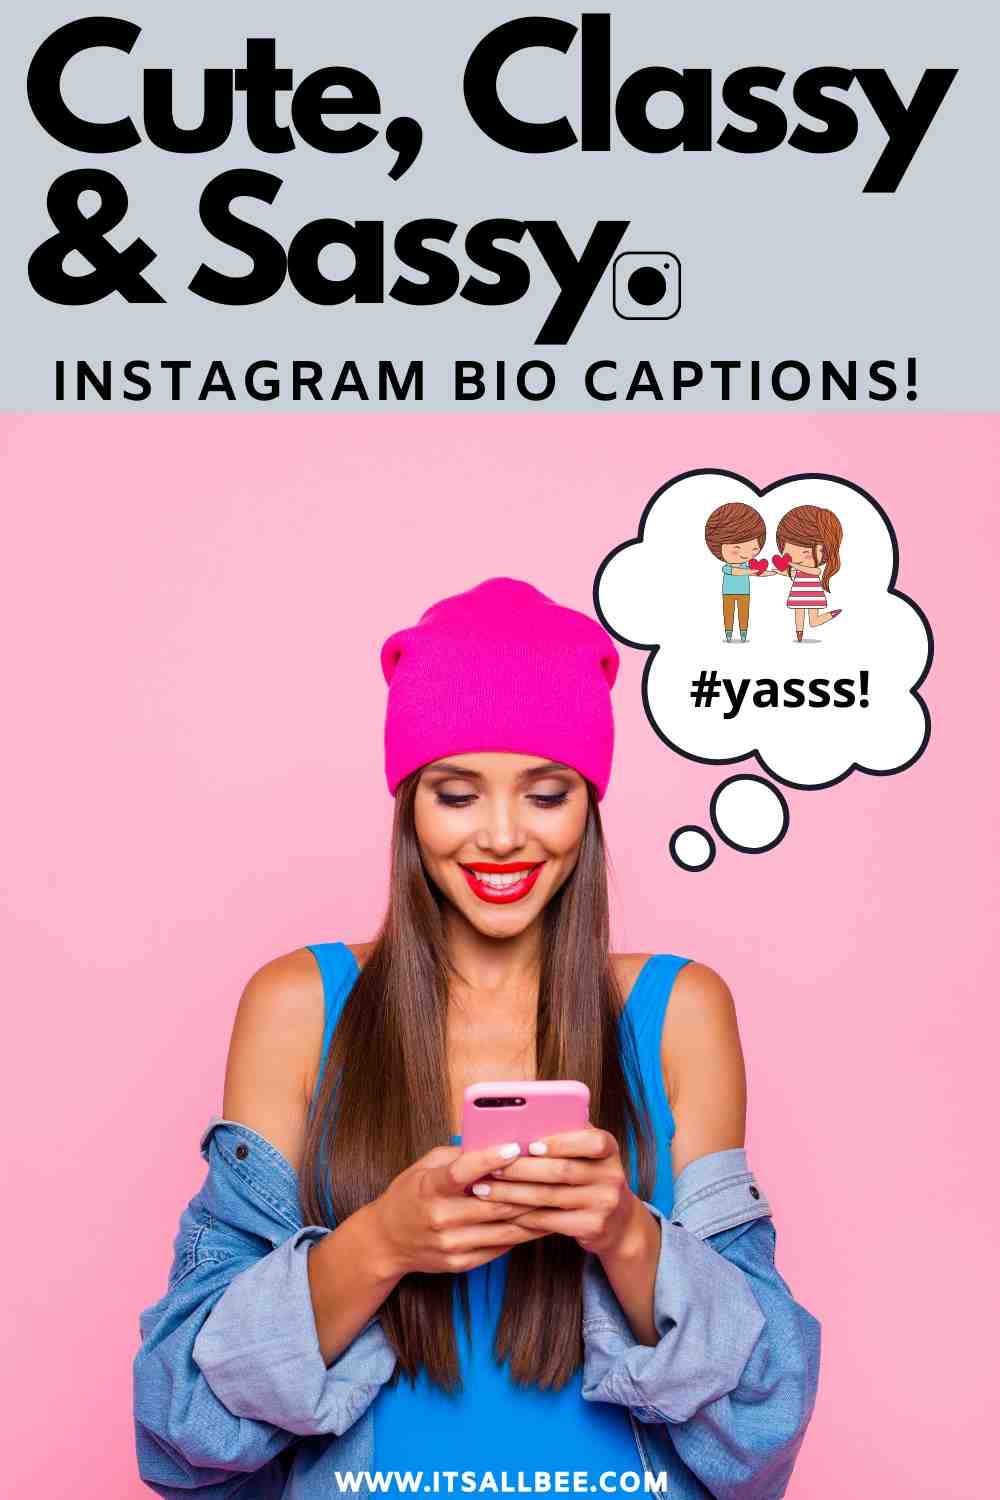 Guide to the best bios for instagram for girls! Cute, classy, funny and sassy 